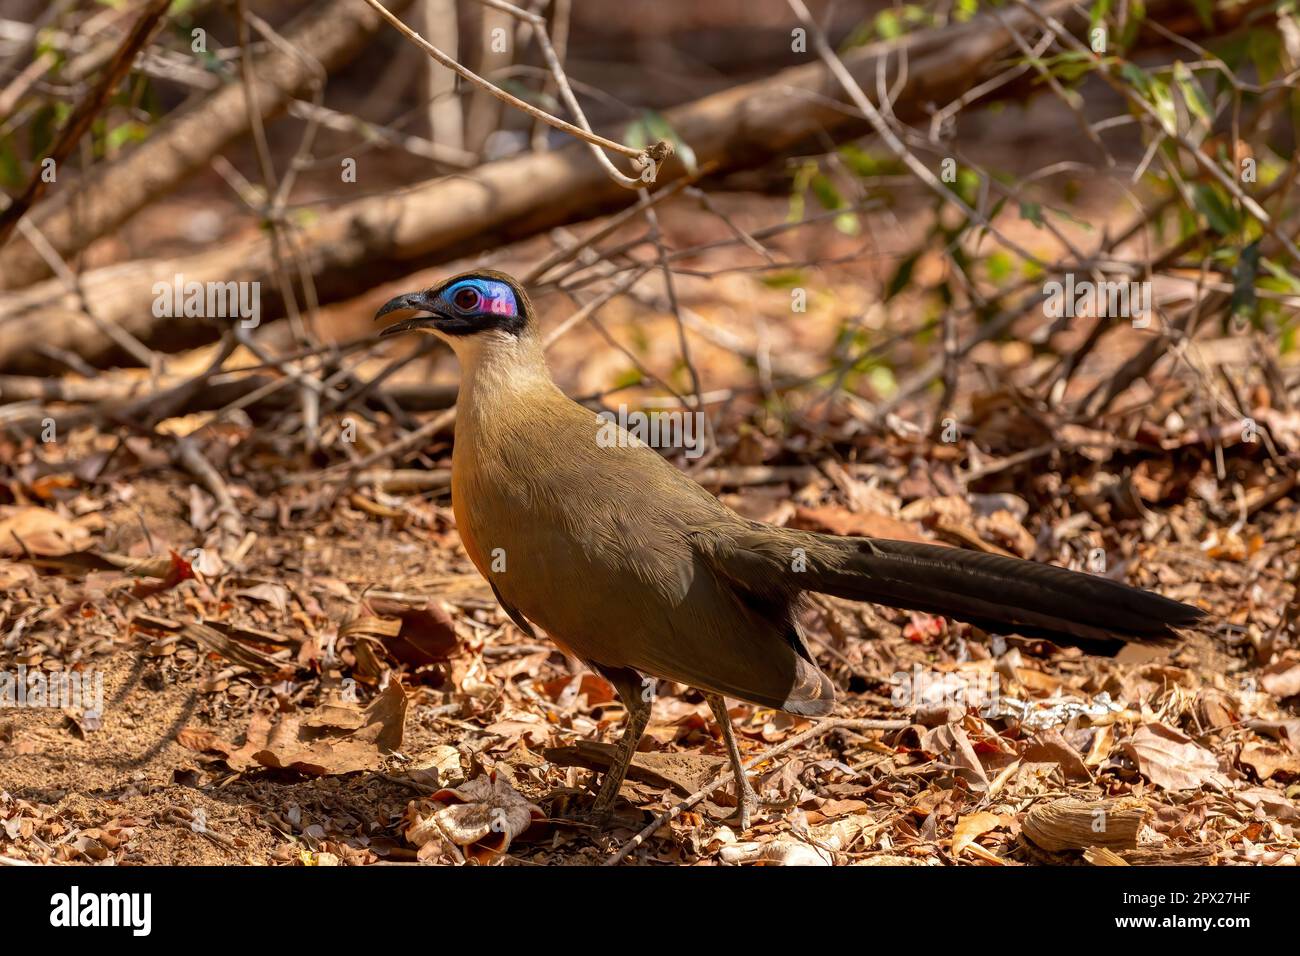 Giant coua (Coua gigas) is a bird species from the coua genus in the cuckoo family that is endemic to the dry forests of western and southern Madagasc Stock Photo